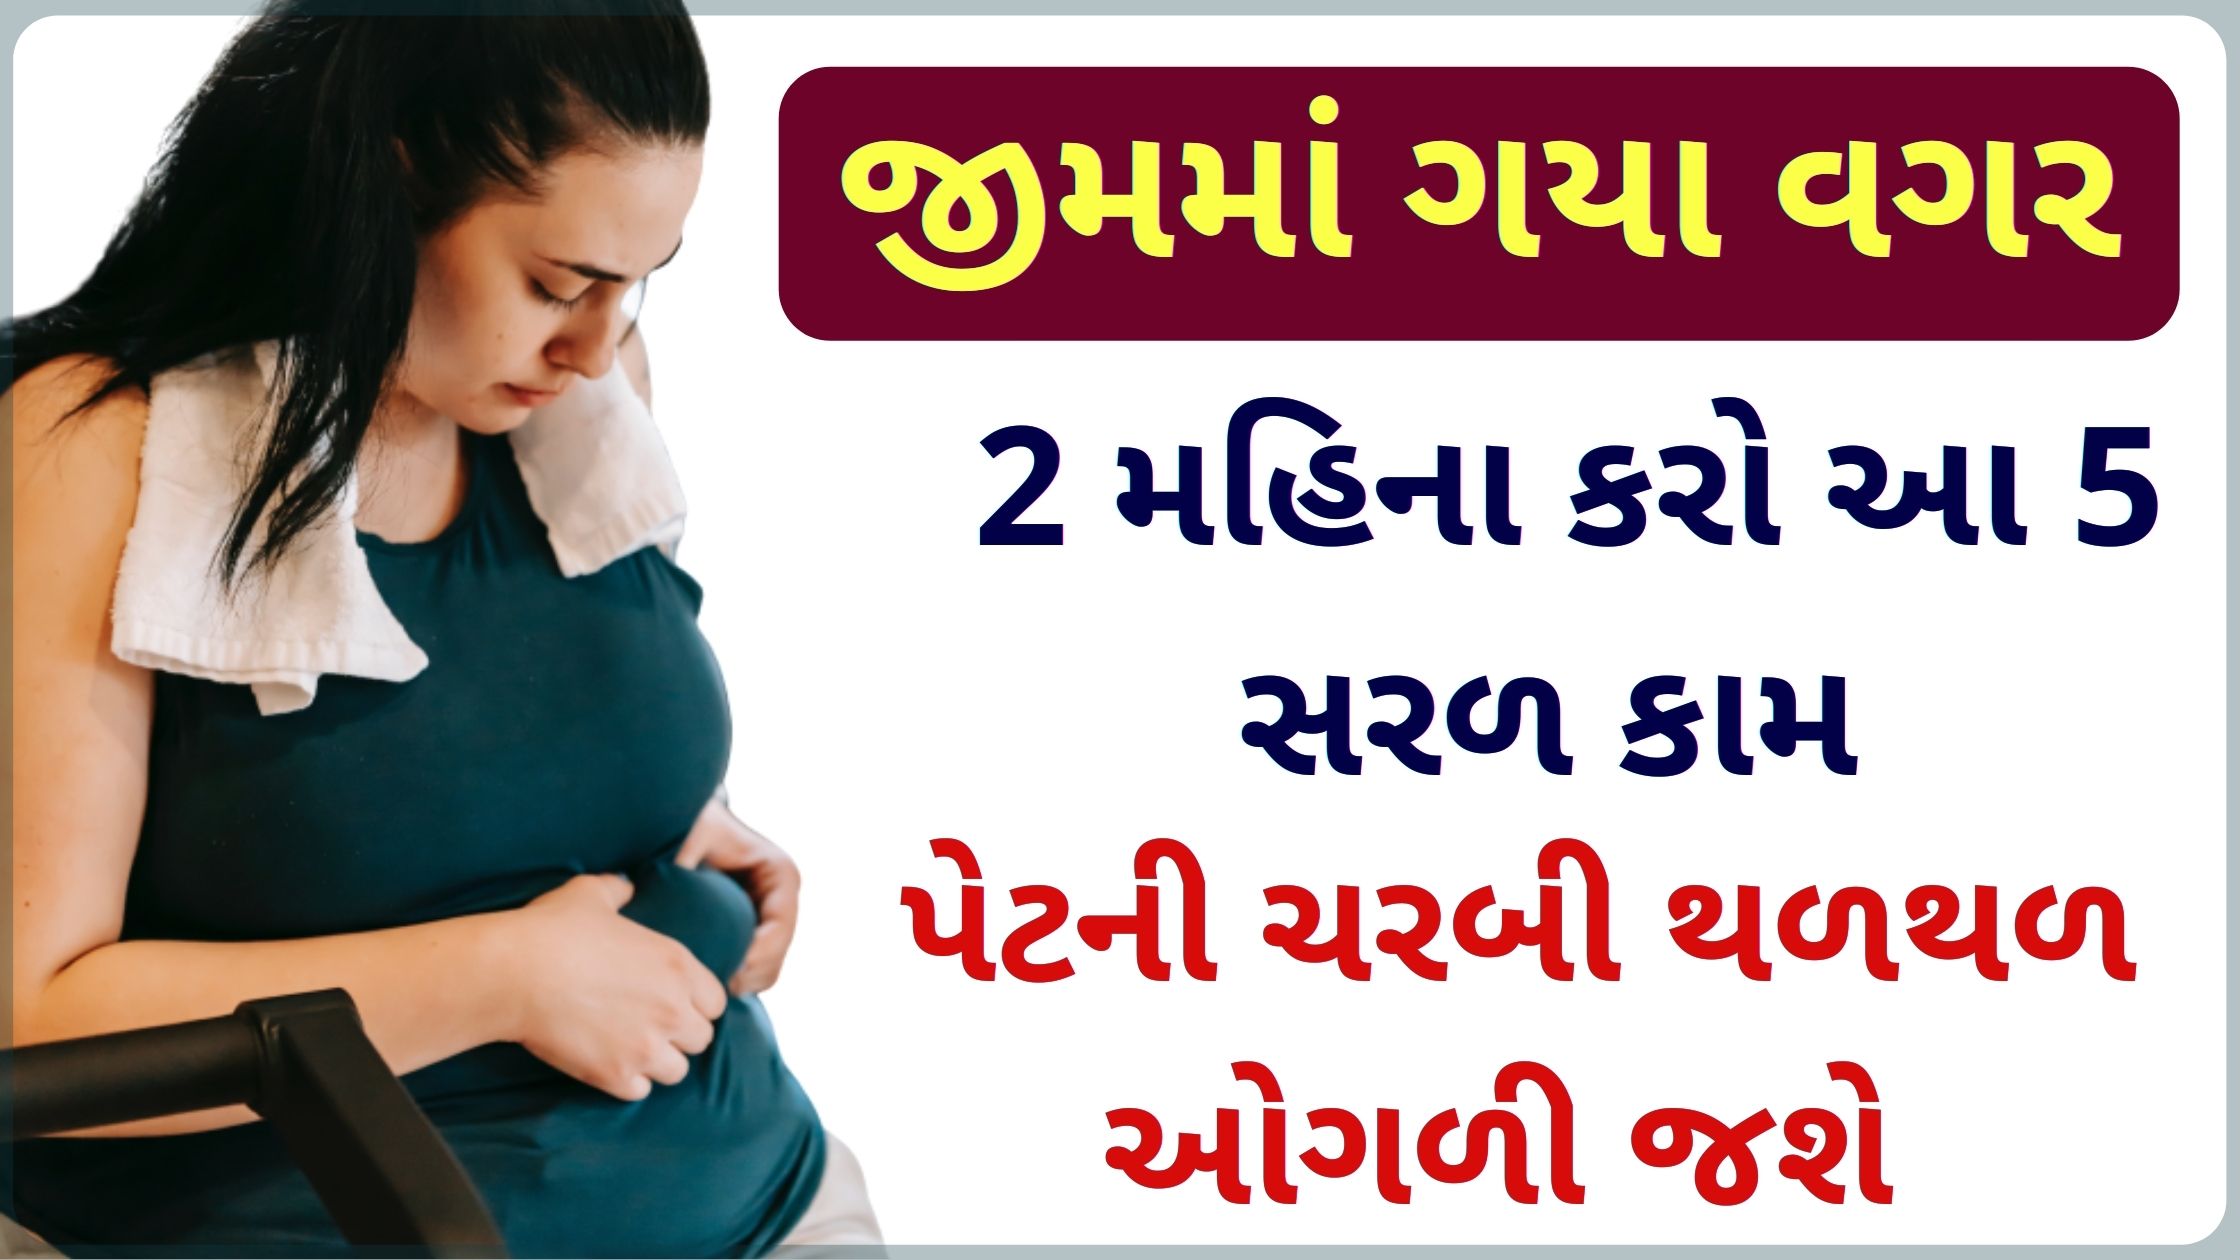 how to lose weight fast in gujarati